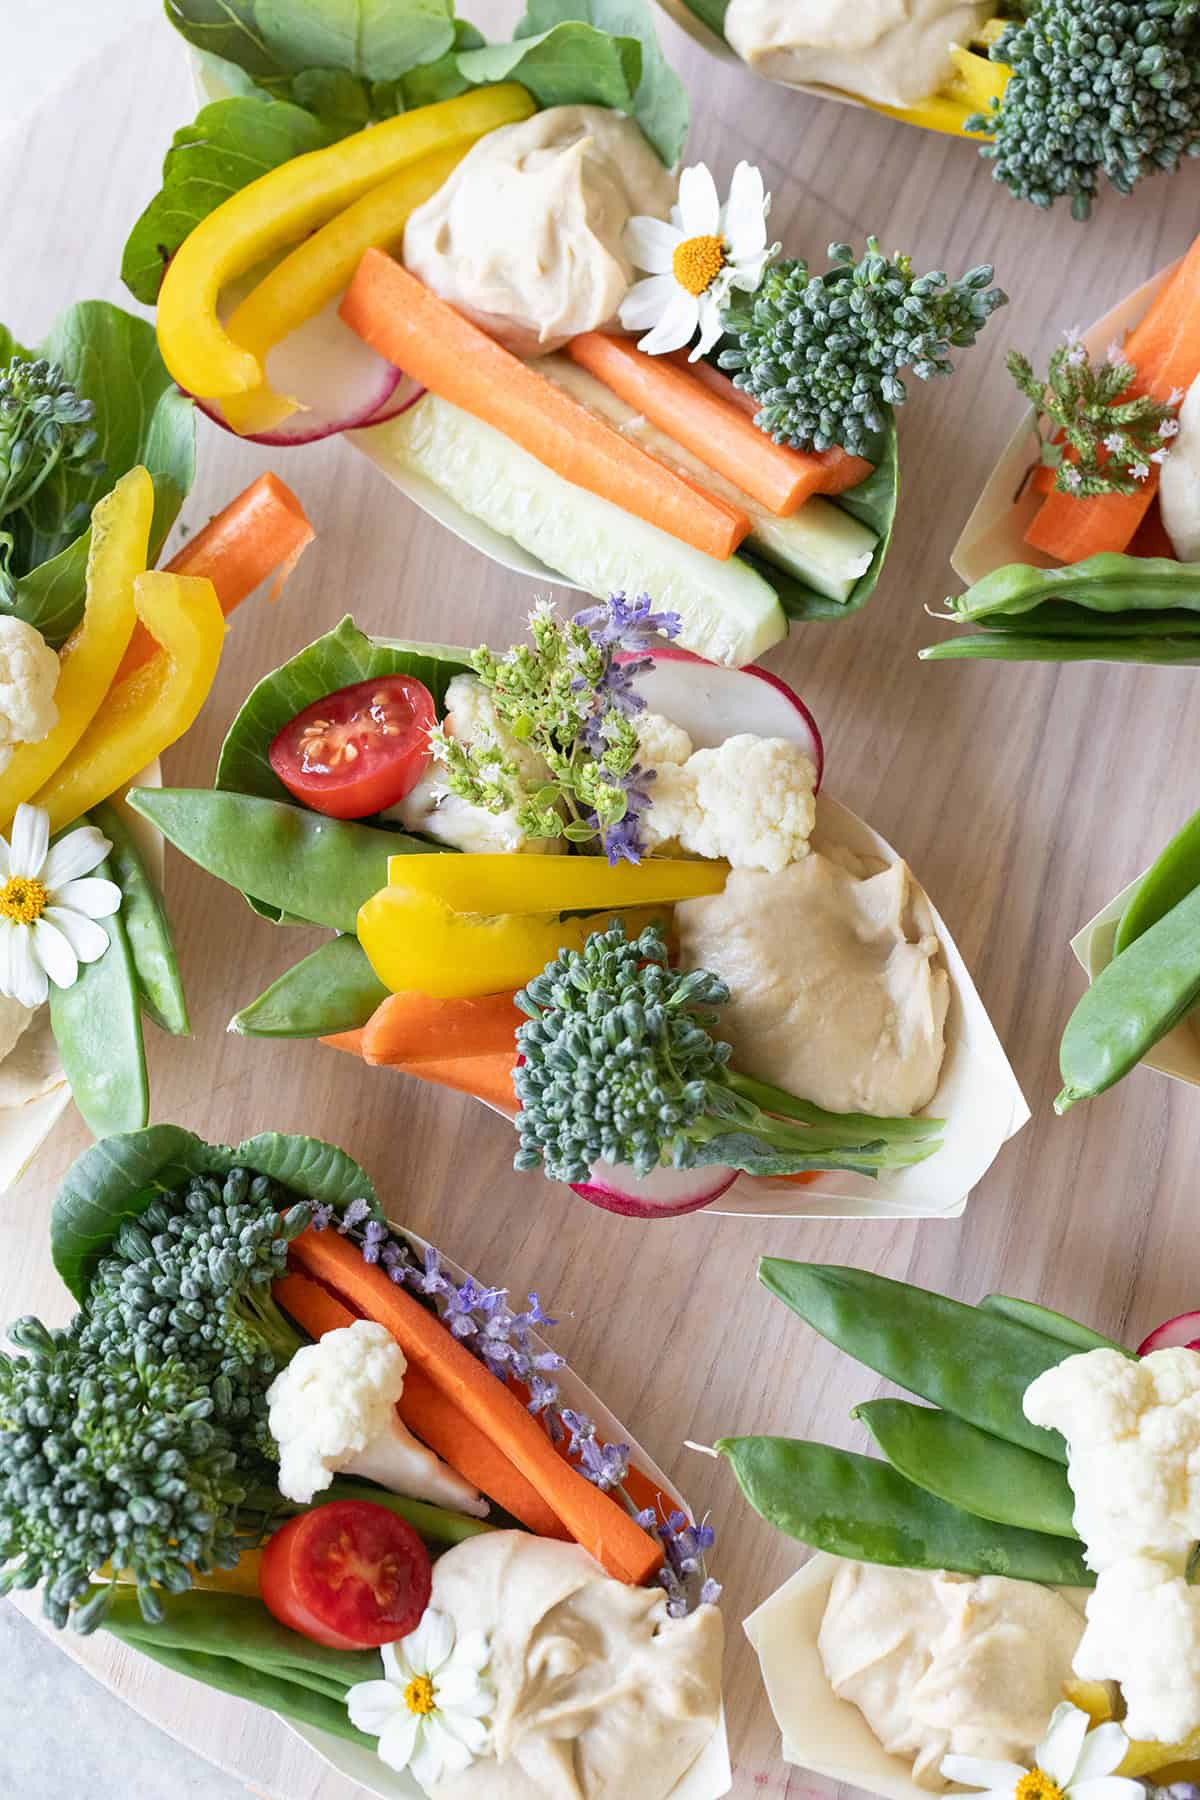 Party appetizer with fresh vegetables served with homemade hummus.